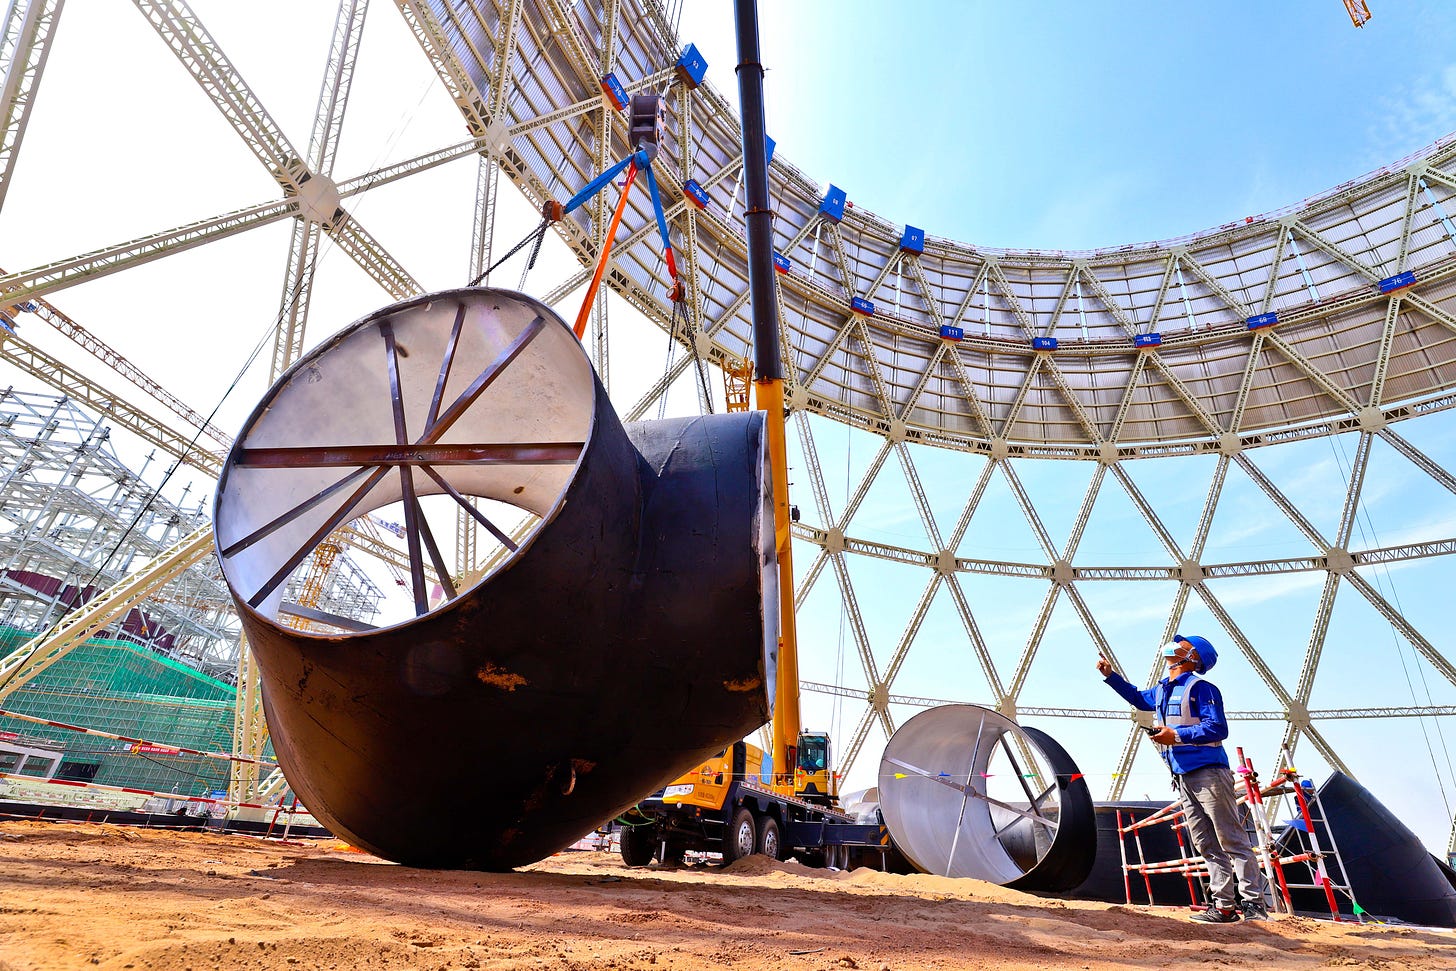 Builders install a cooling tower ventilation pipe at the site of a coal-fired unit expansion project on May 2 in Zhangye, China. Credit: Costfoto/NurPhoto via Getty Images